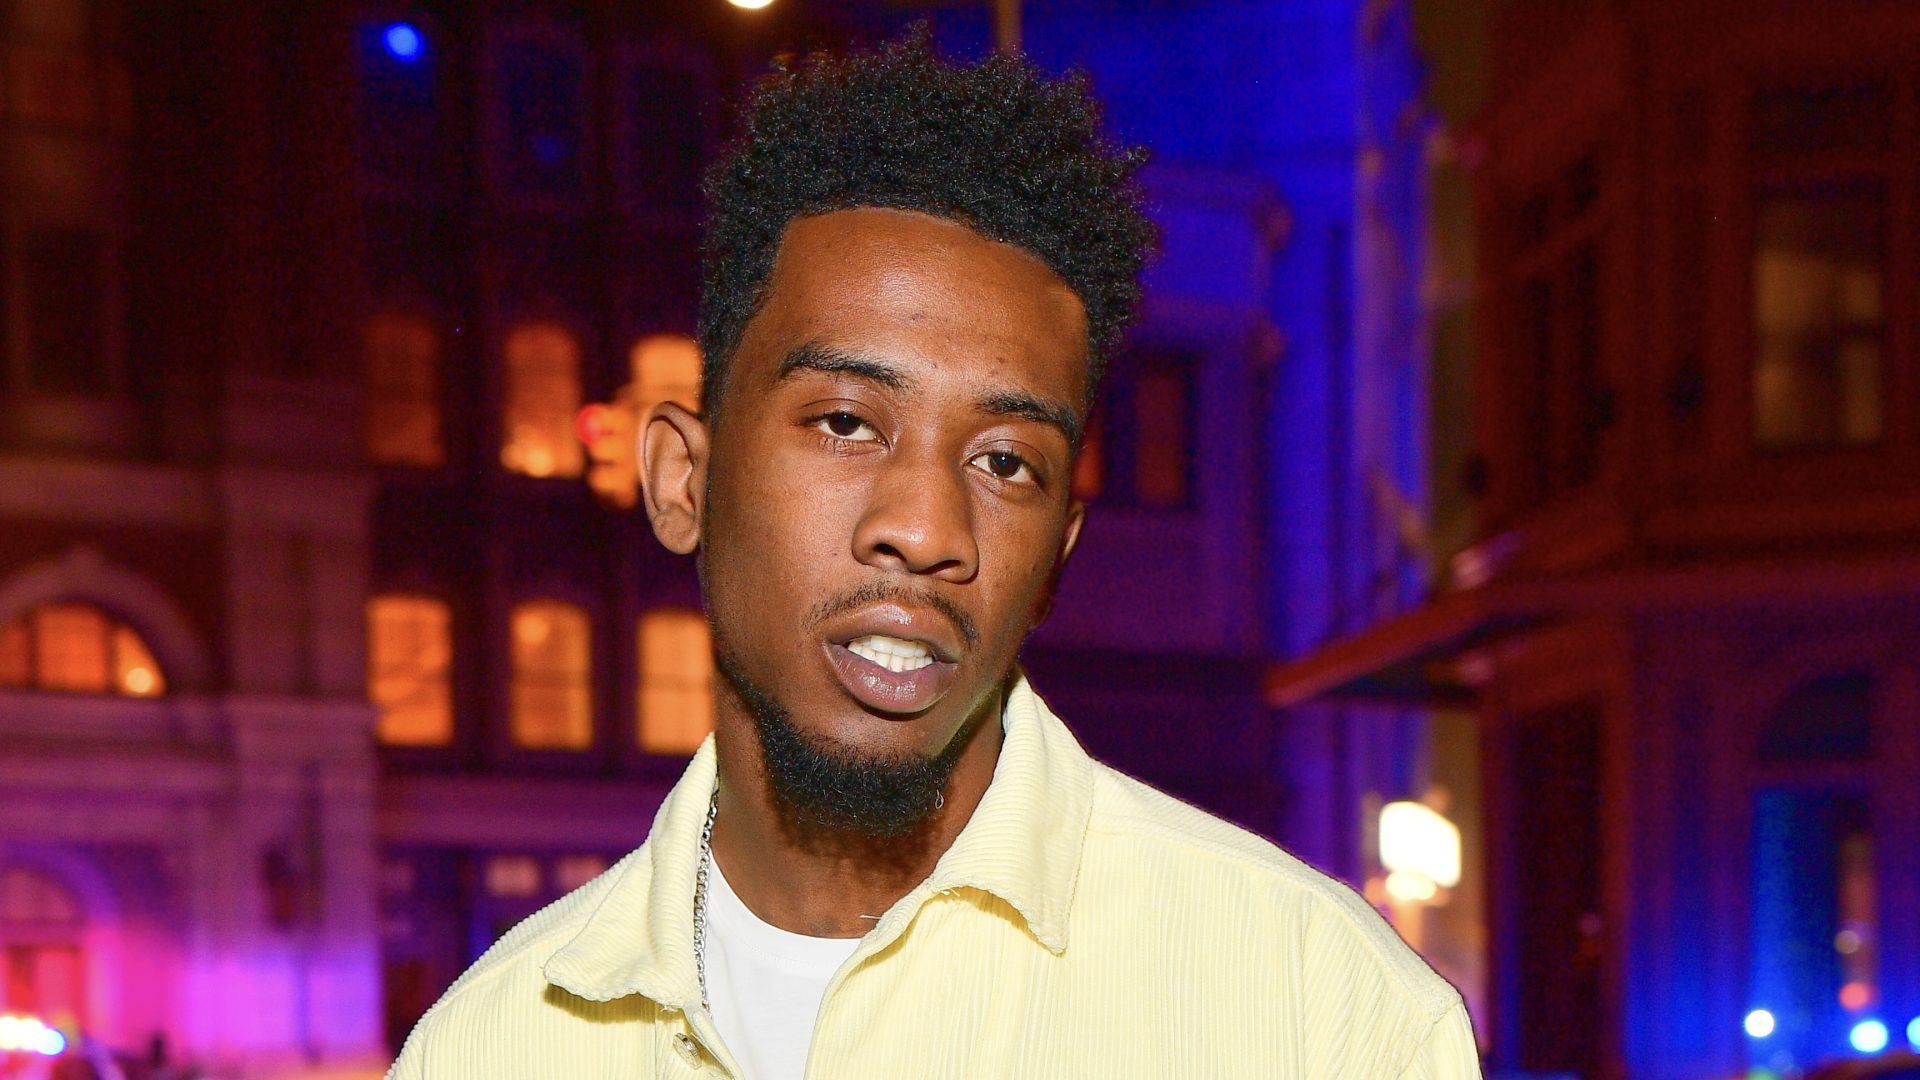 Desiigner Charged With Exposing Himself While On Airplane